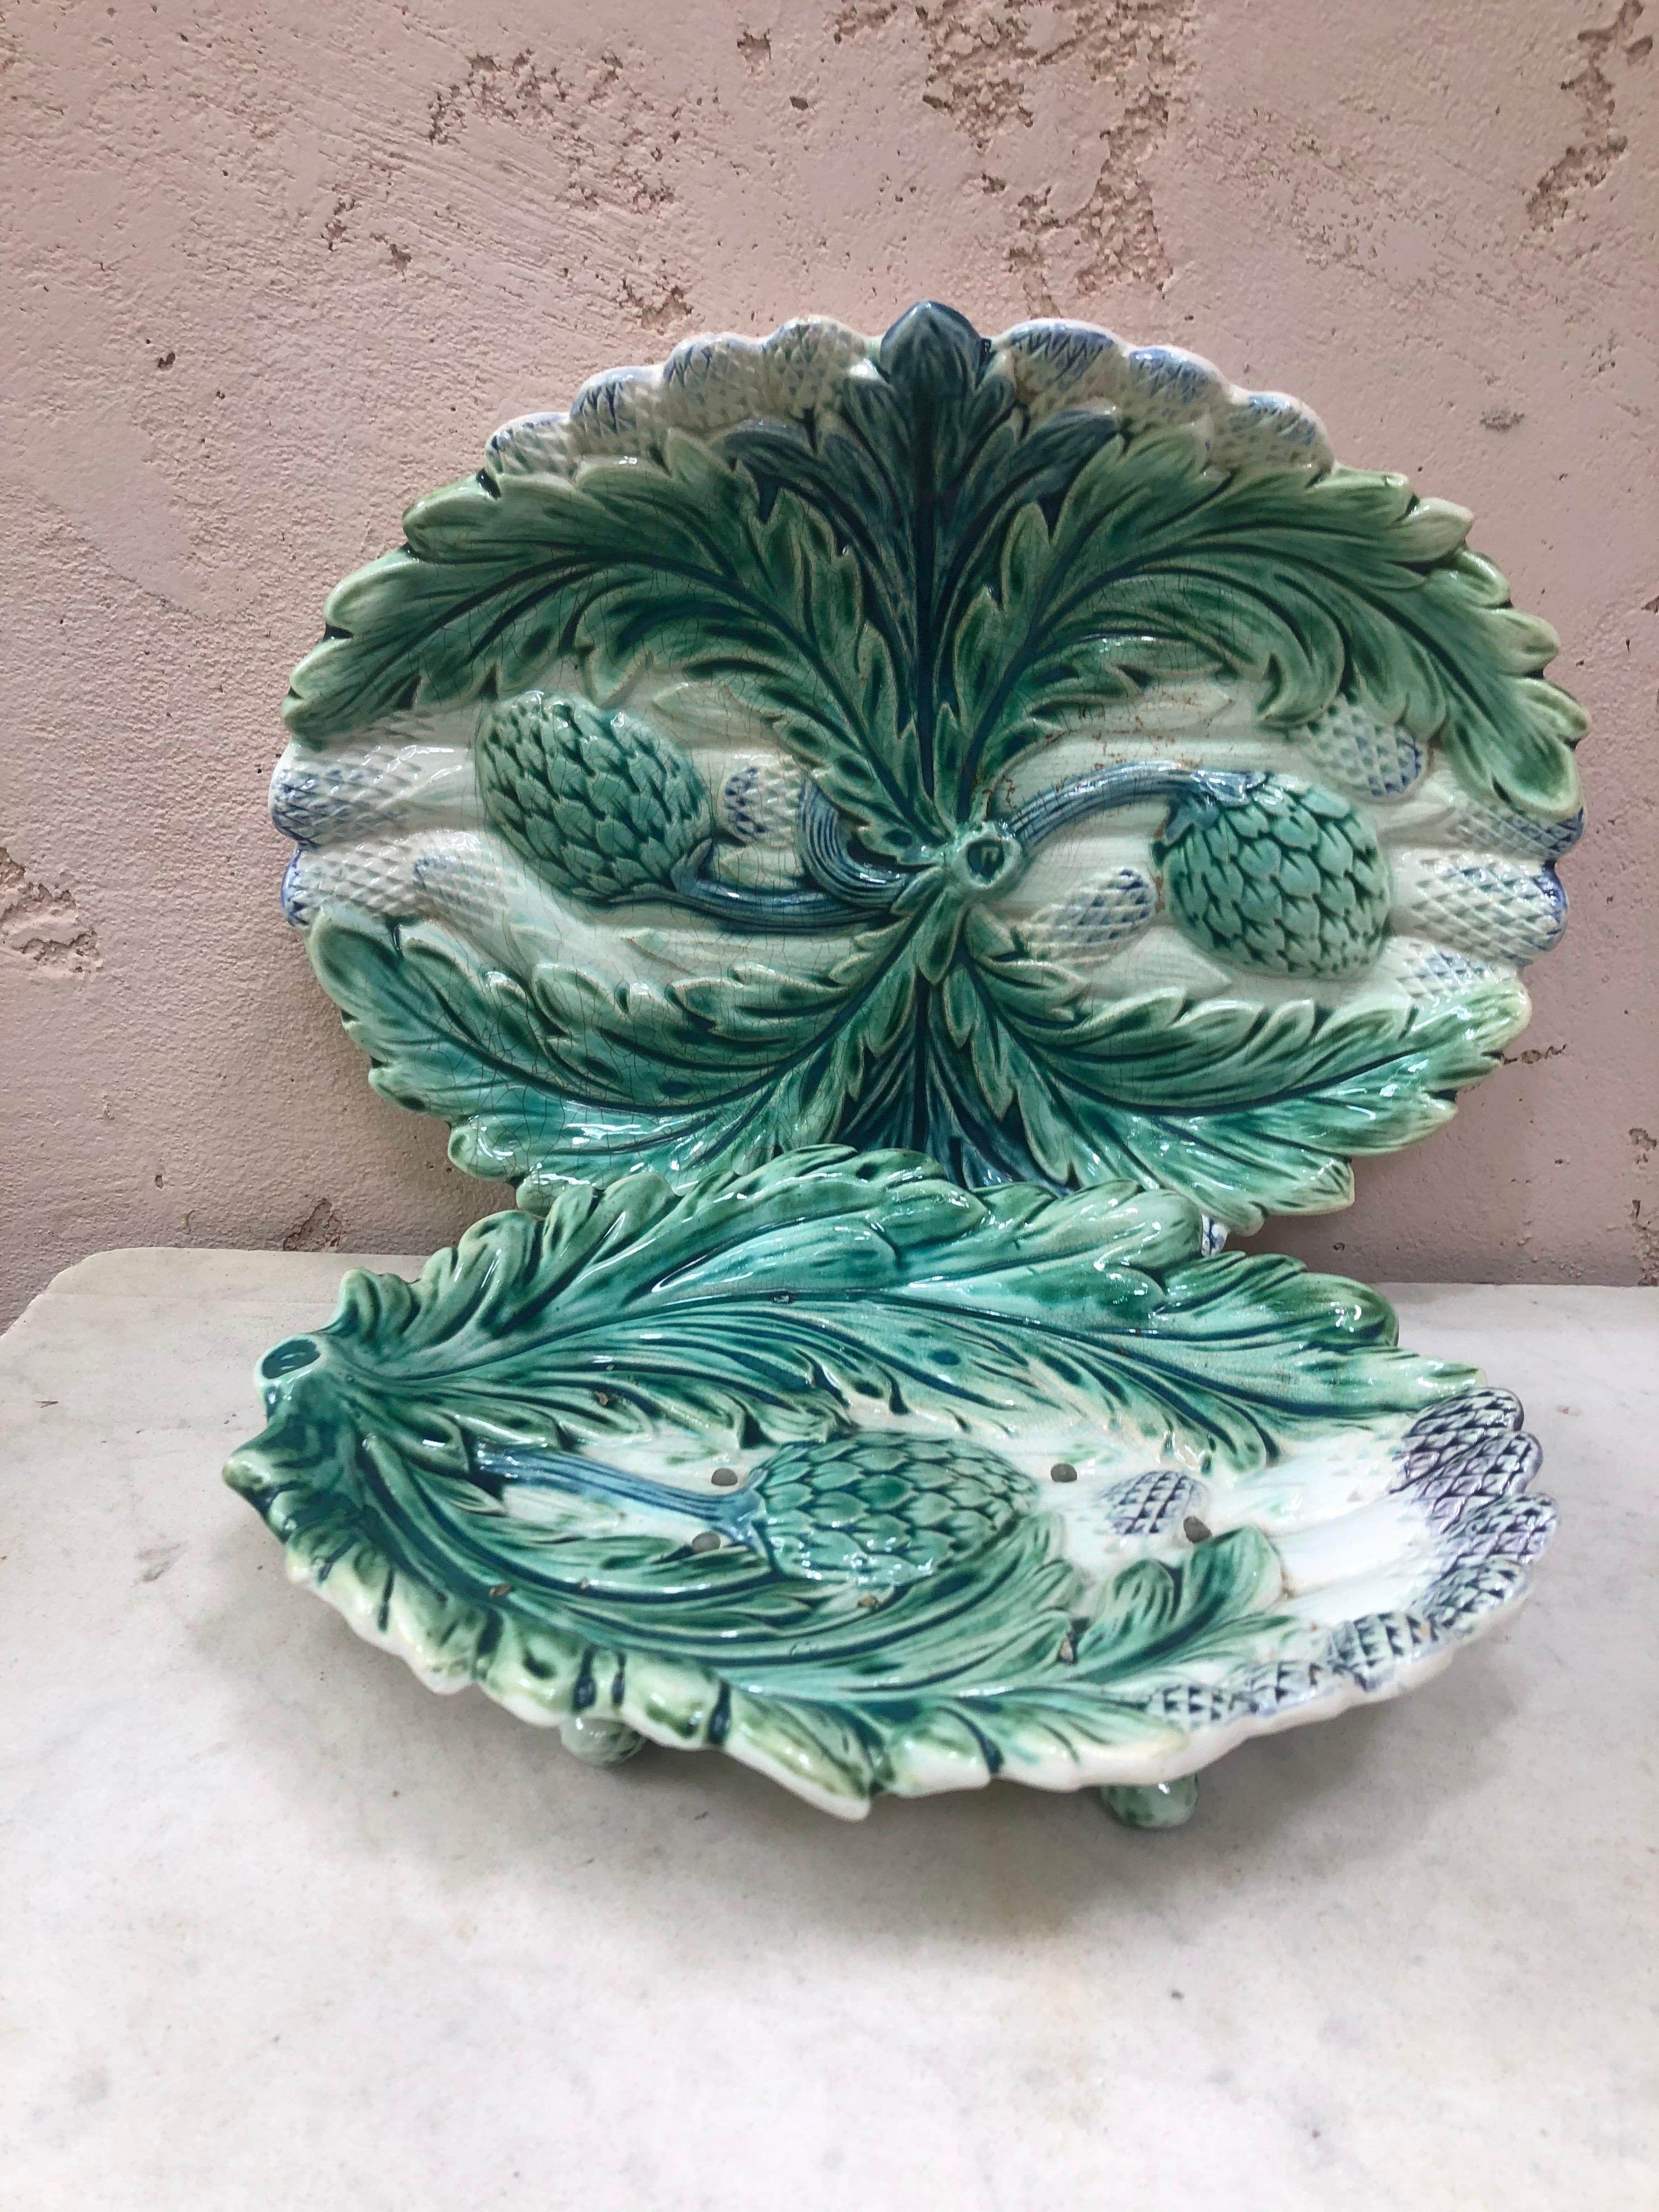 Majolica asparagus and artichoke platter in two pieces fives Lille, circa 1890.
Measures: Two pieces / the platter 13 